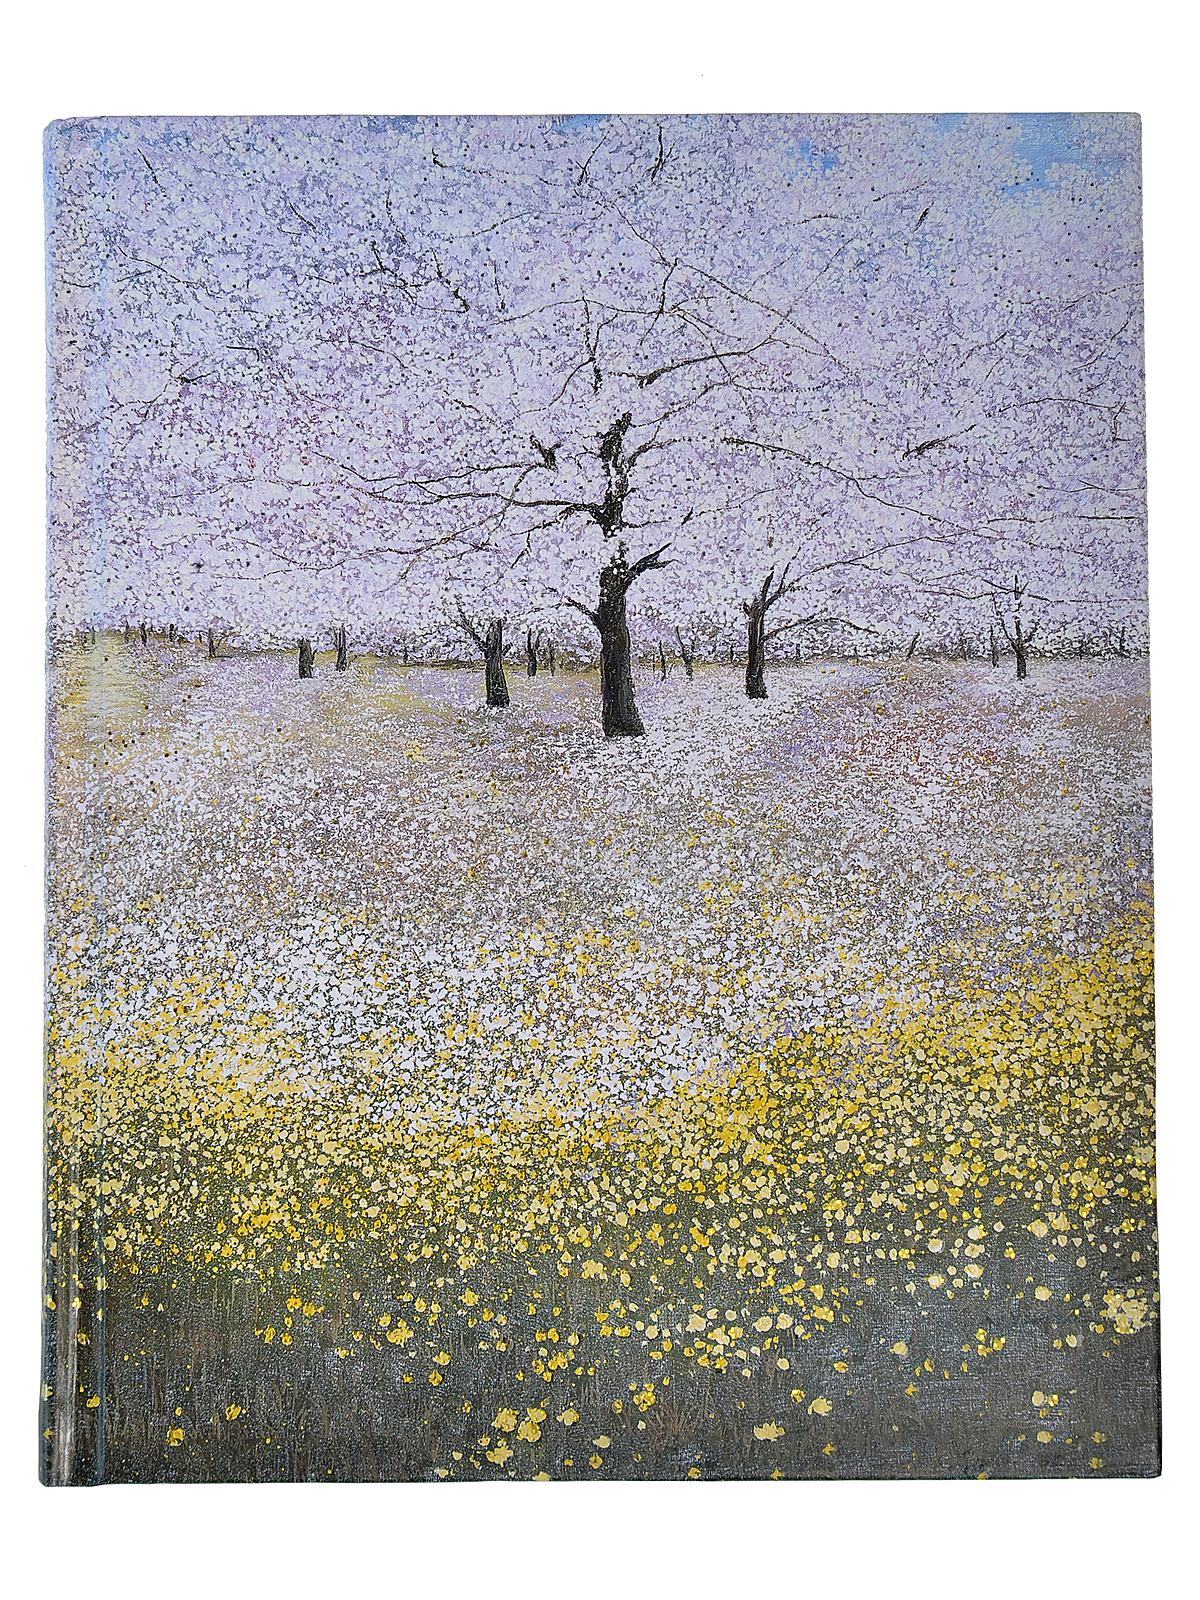 Oversized Journals Trees In Bloom 7 1 4 In. X 9 In. 192 Pages, Lined